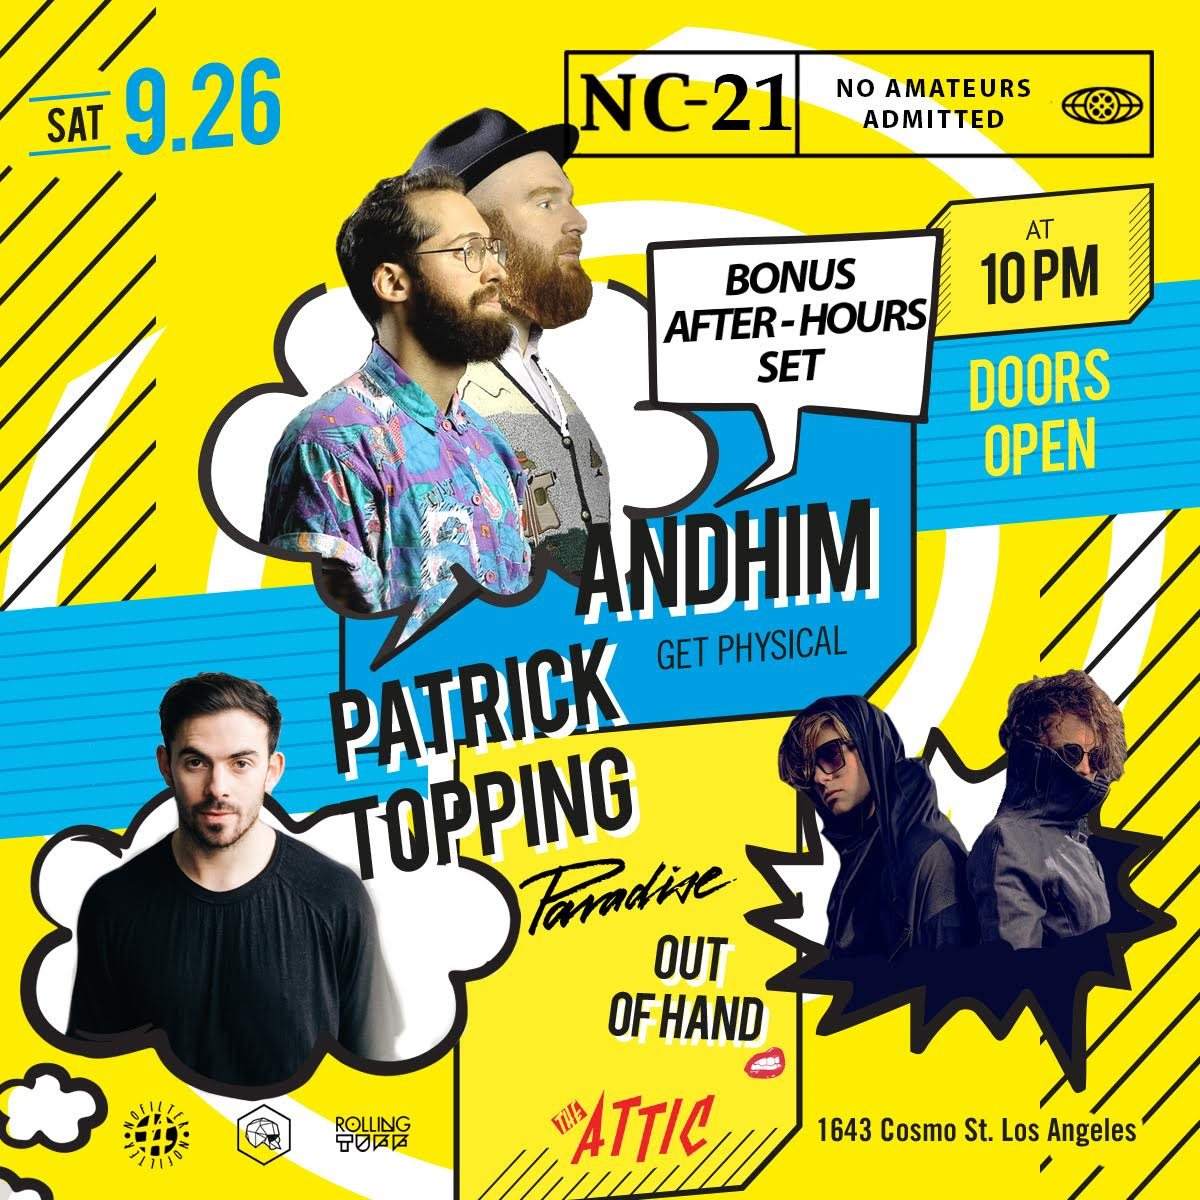 Nofilter presents NC-21 Feat. Patrick Topping, Andhim & Out of Hand - Página frontal